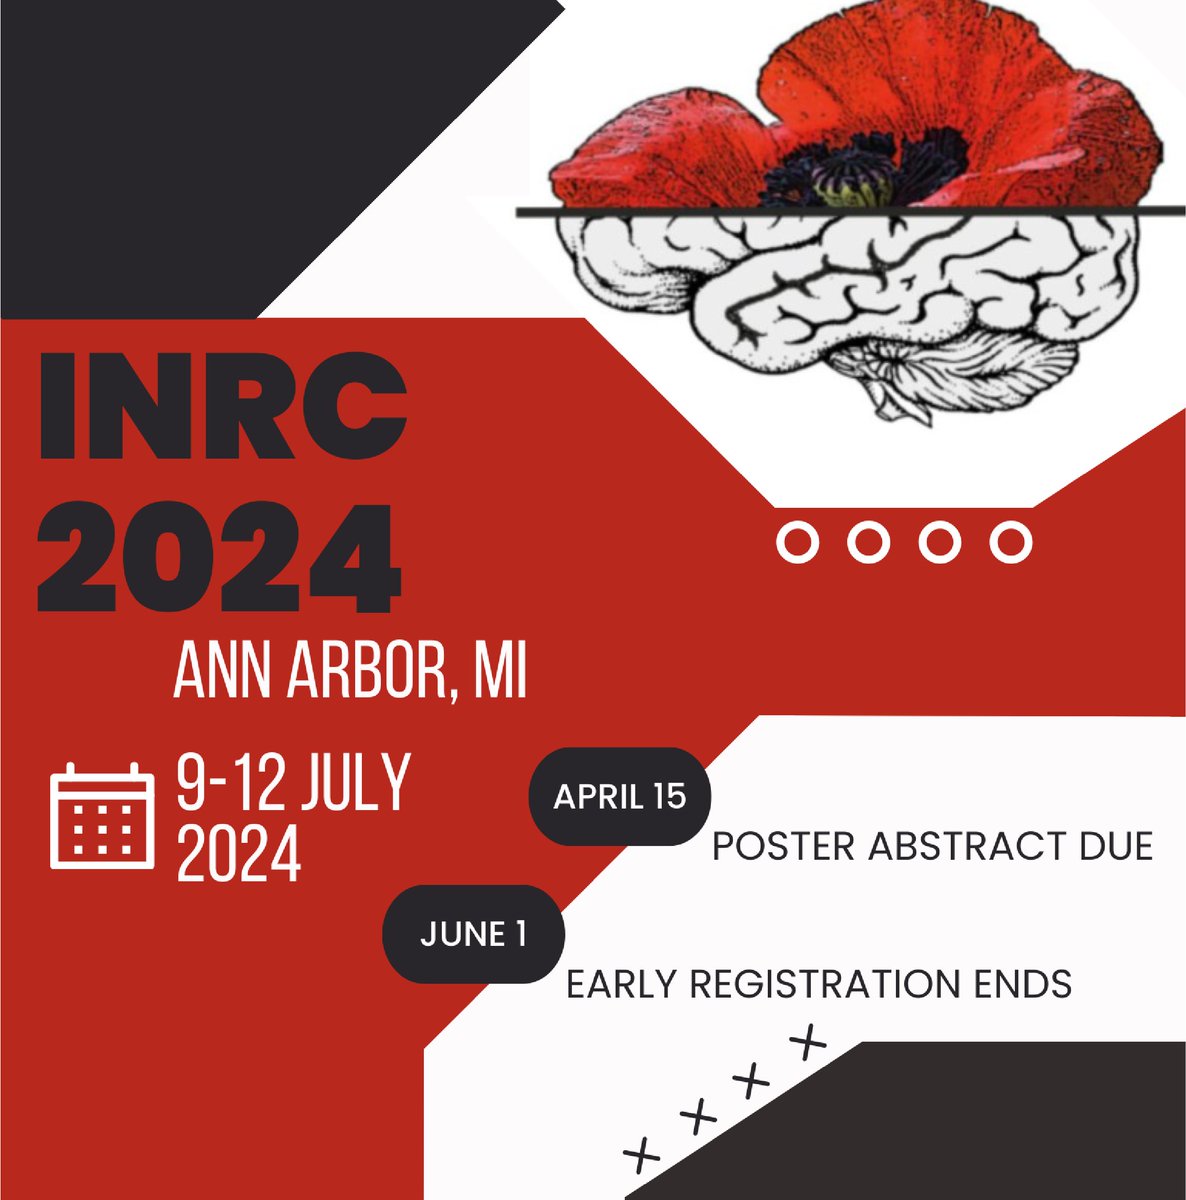 💥Registration & poster abstract submission open💥 You can register for INRC24 here: tinyurl.com/2s4at5m2 Submit your poster abstract here: tinyurl.com/y69dwnf9 More info can be found at: inrconference.org